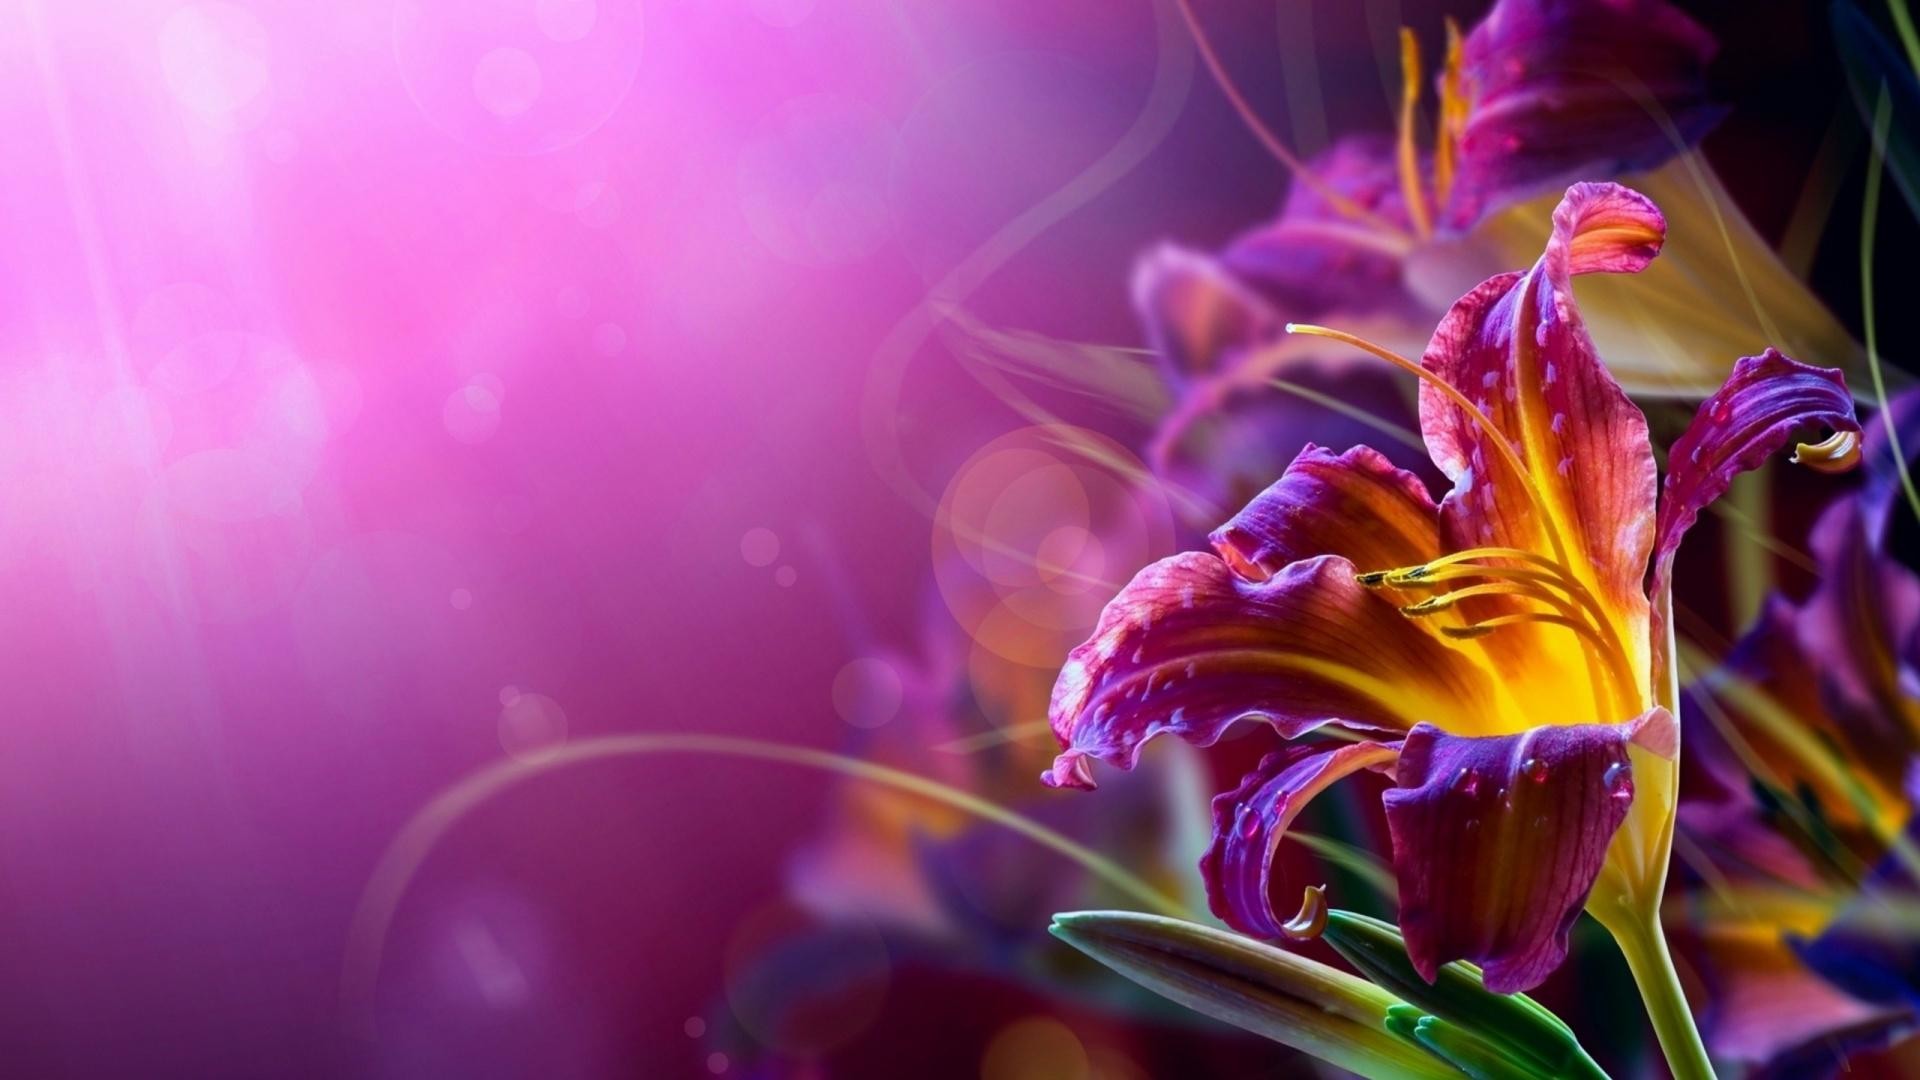 6. flowers funeral home wallpaper6 600×338